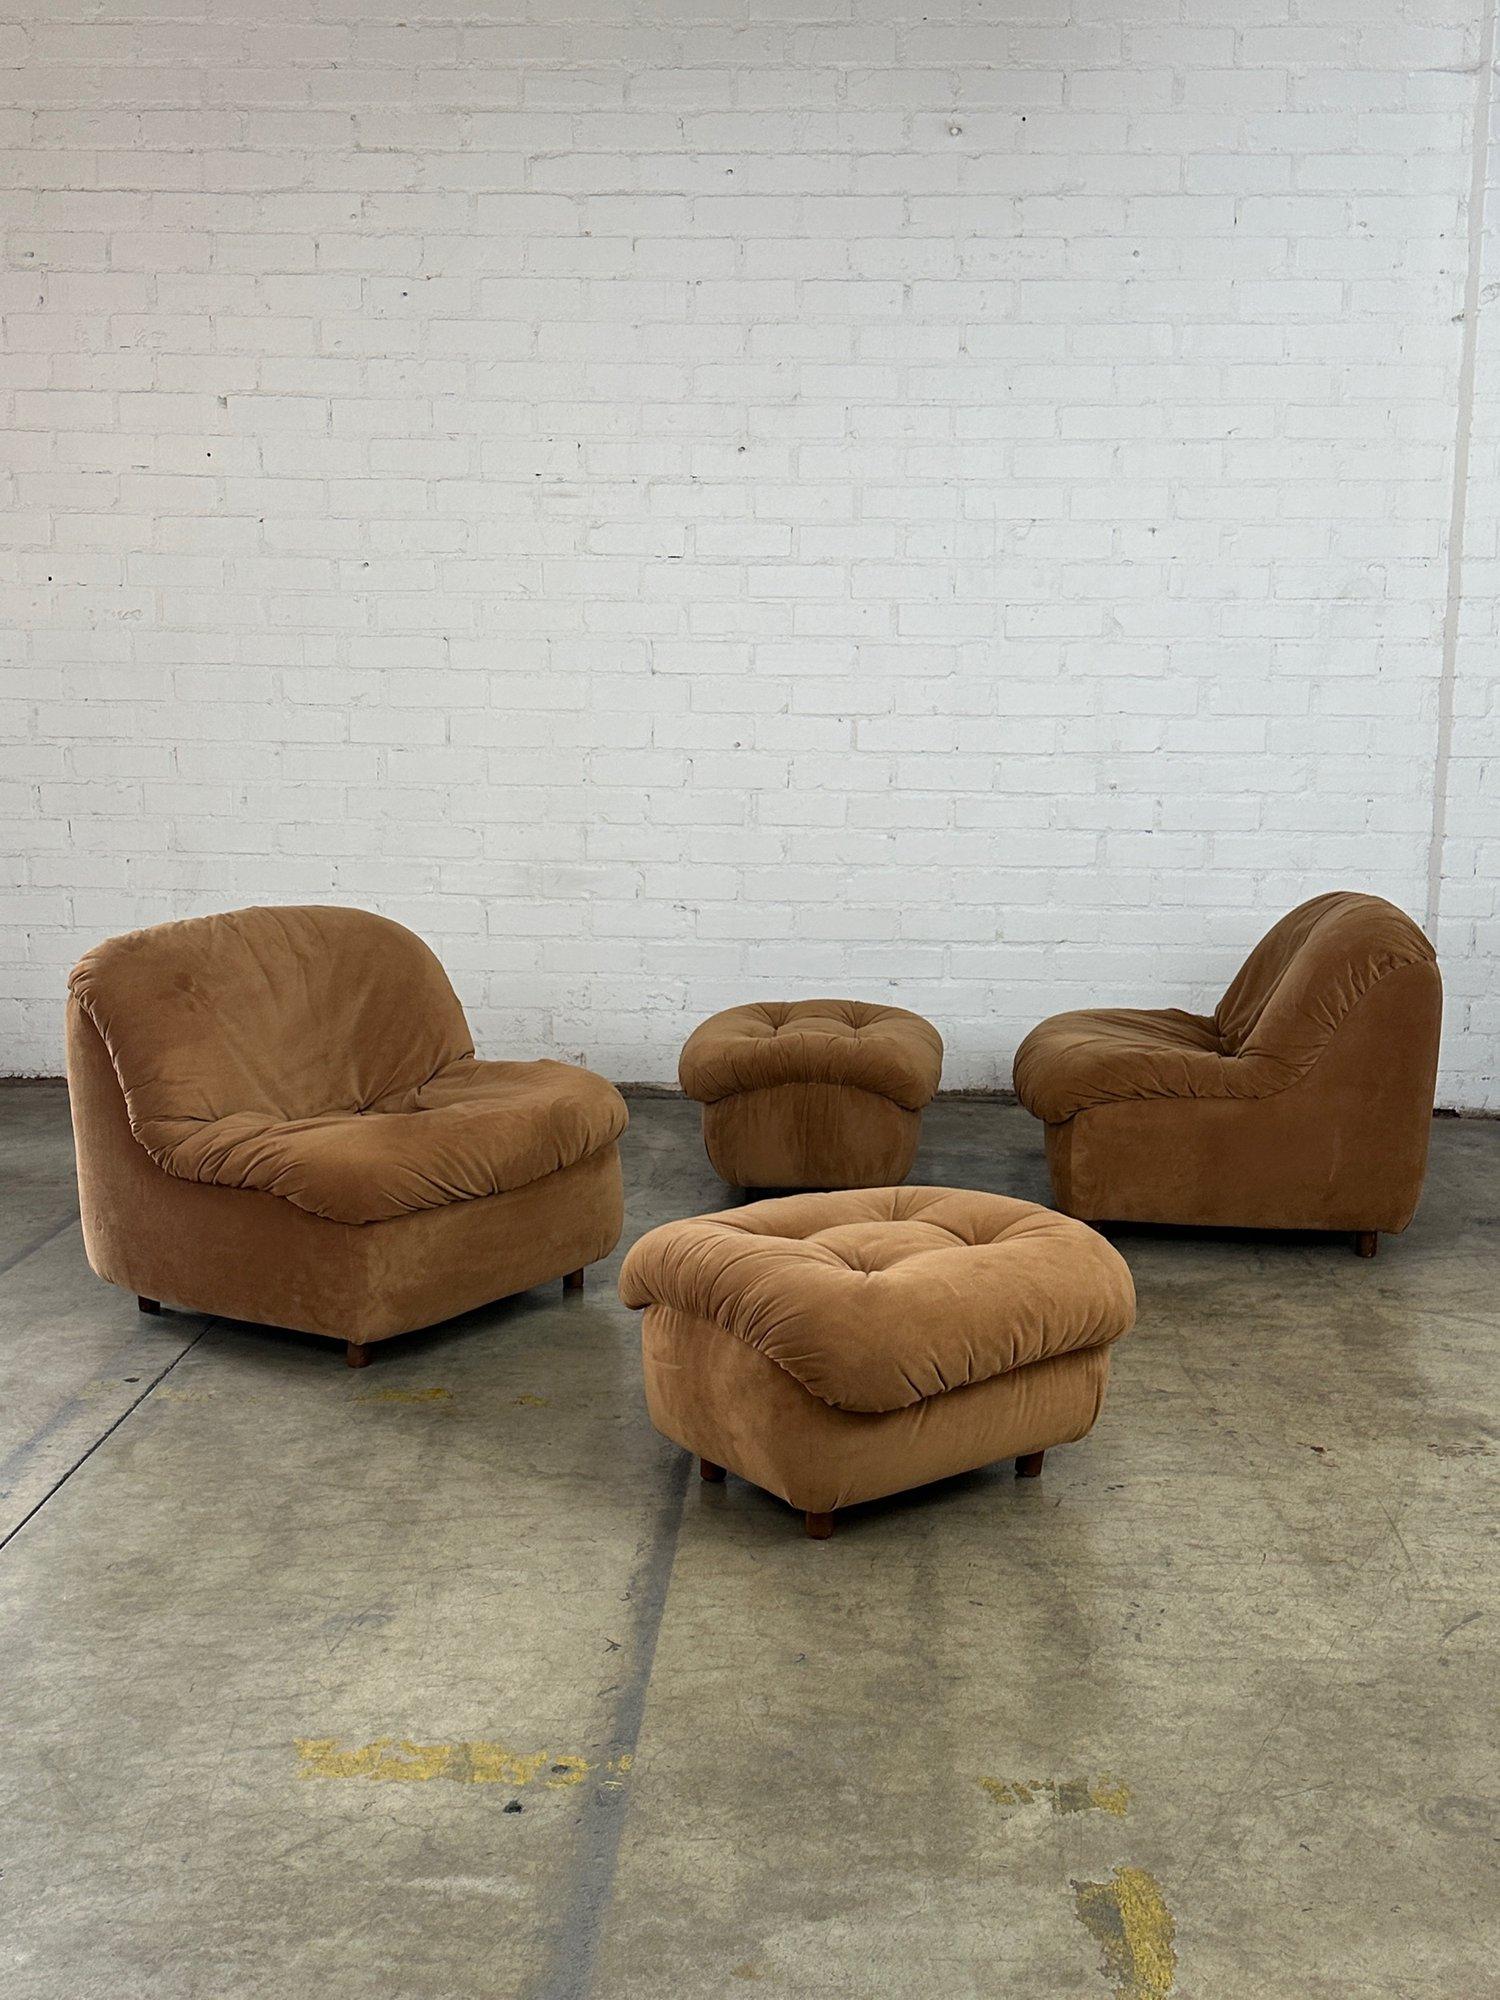 W31 D39 H26 SW31 SD18 SH14

Scoop lounge chairs and ootmans in great gentyl used condtion. Entire set was previously reupholstered by previous owners and each unit shows well with no visible rips or tears. Minor pressure marks have been pictured